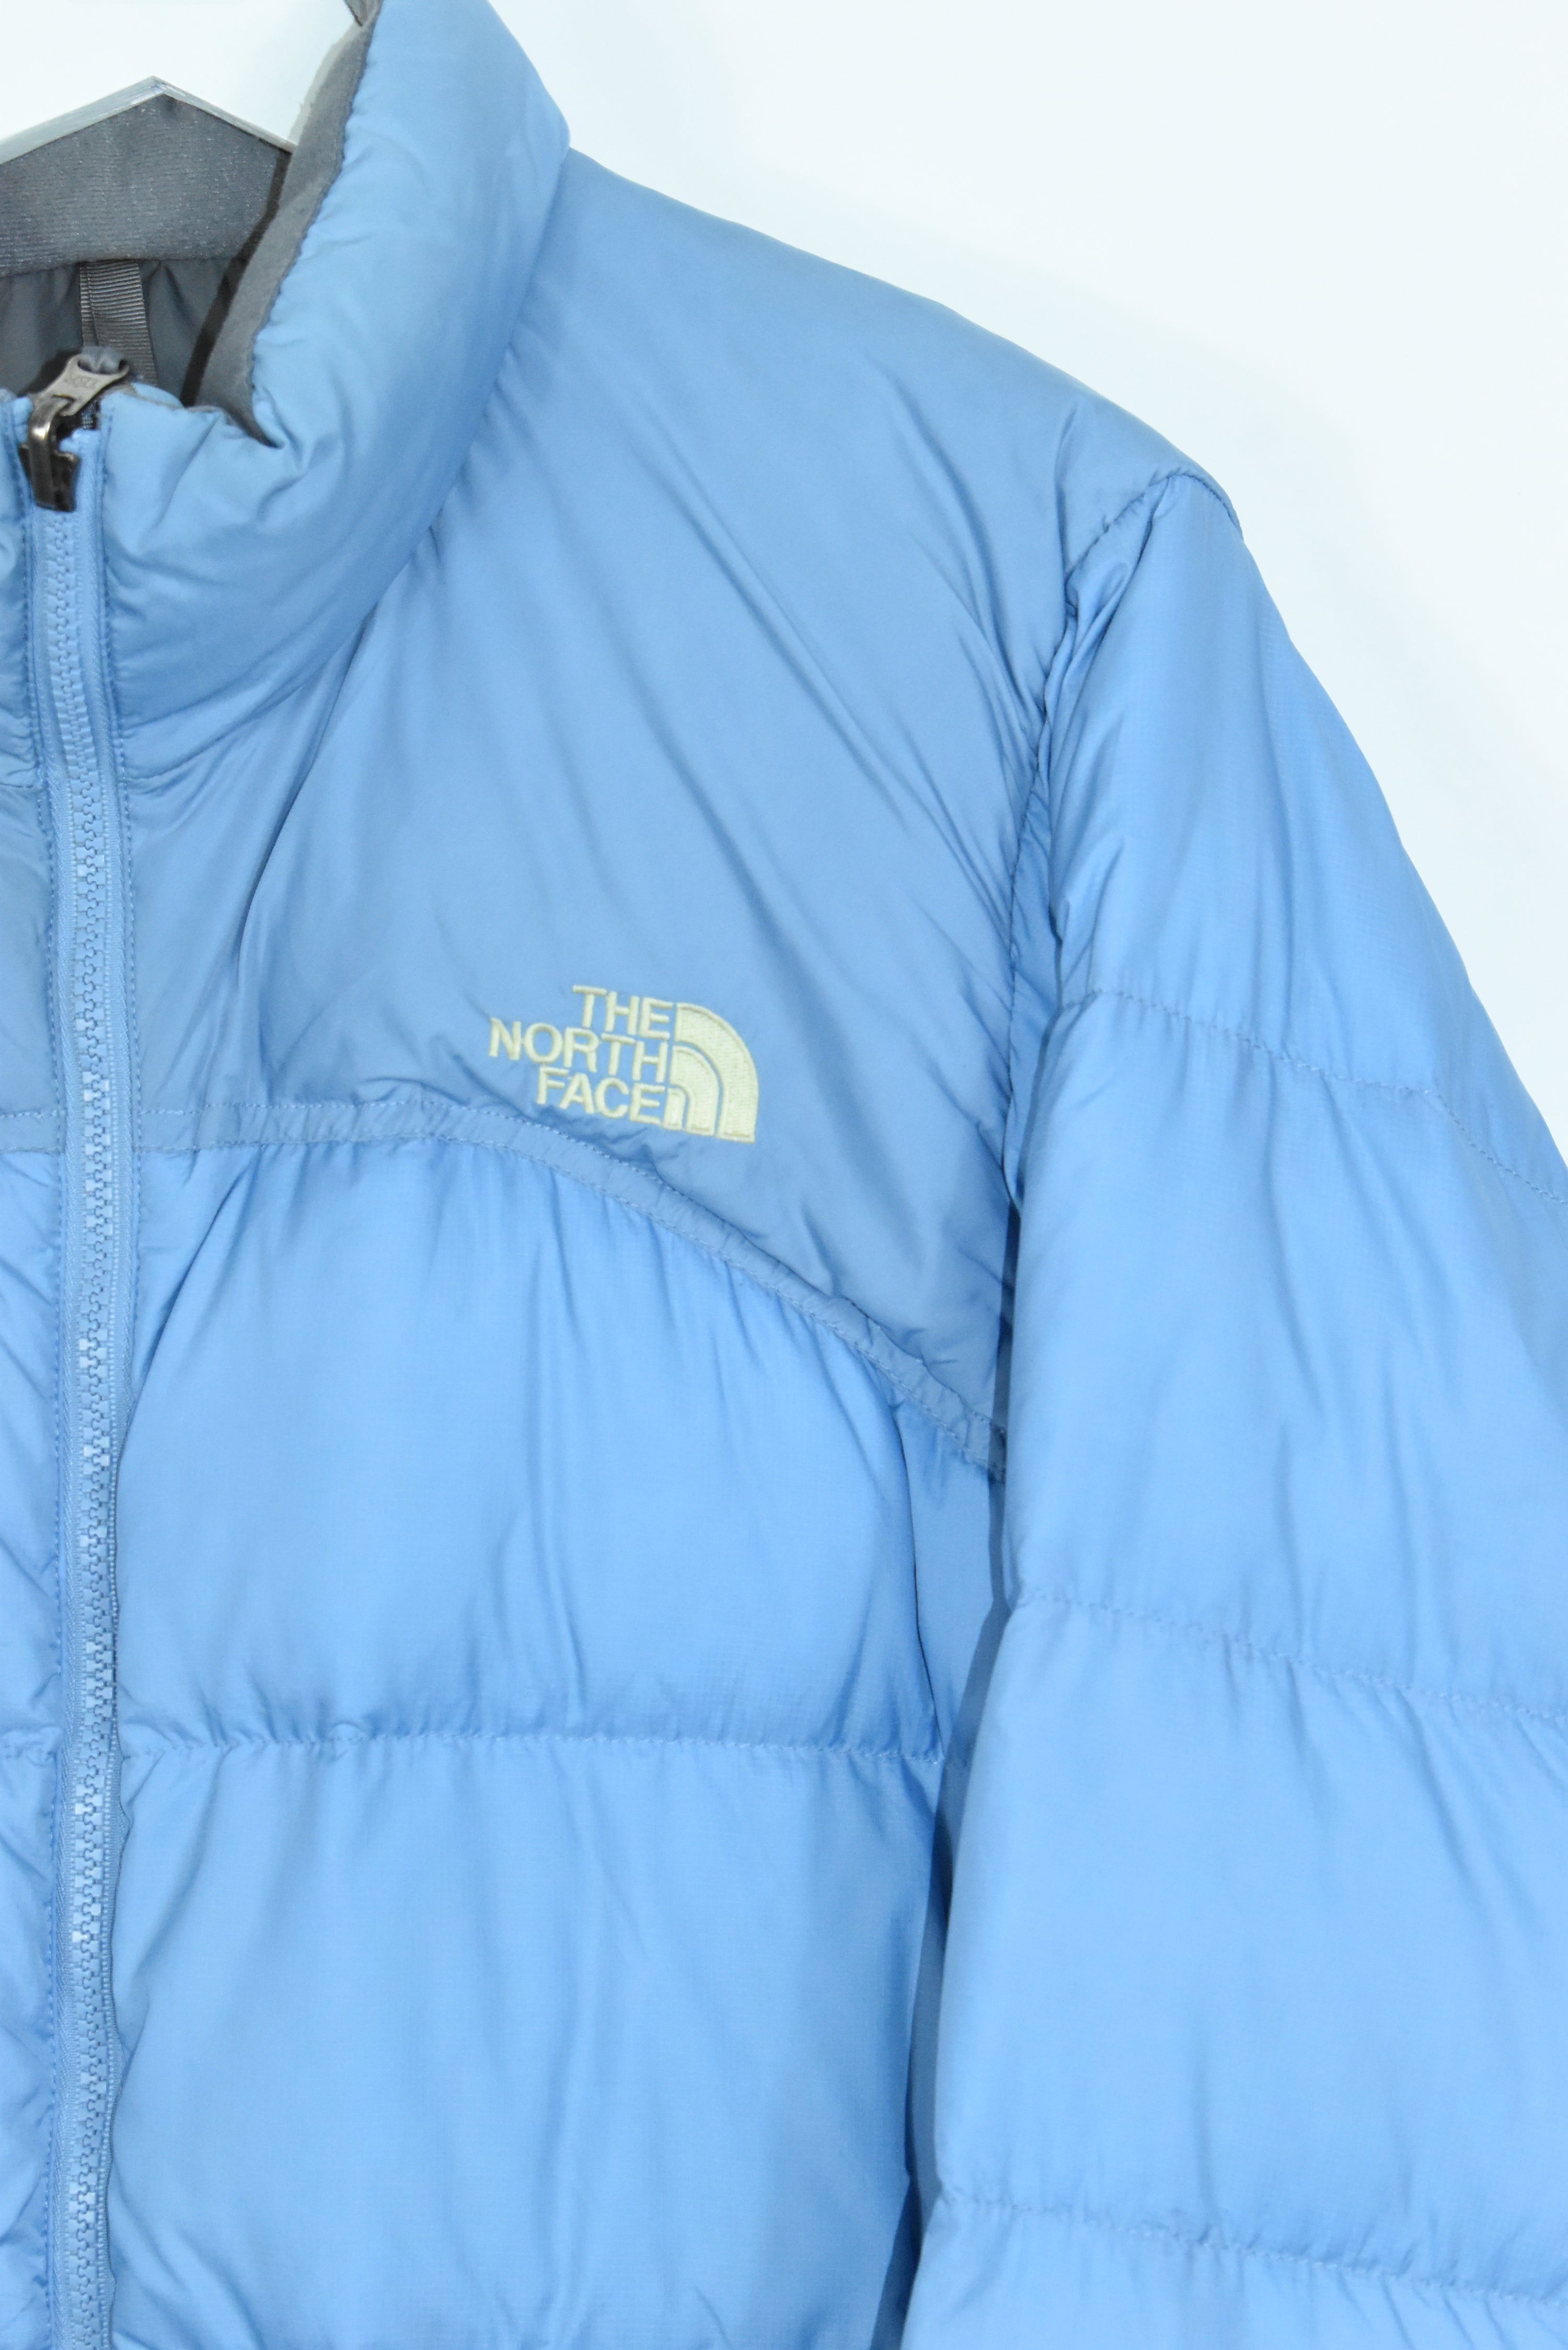 Vintage North Face Baby Blue Puffer Womens LARGE